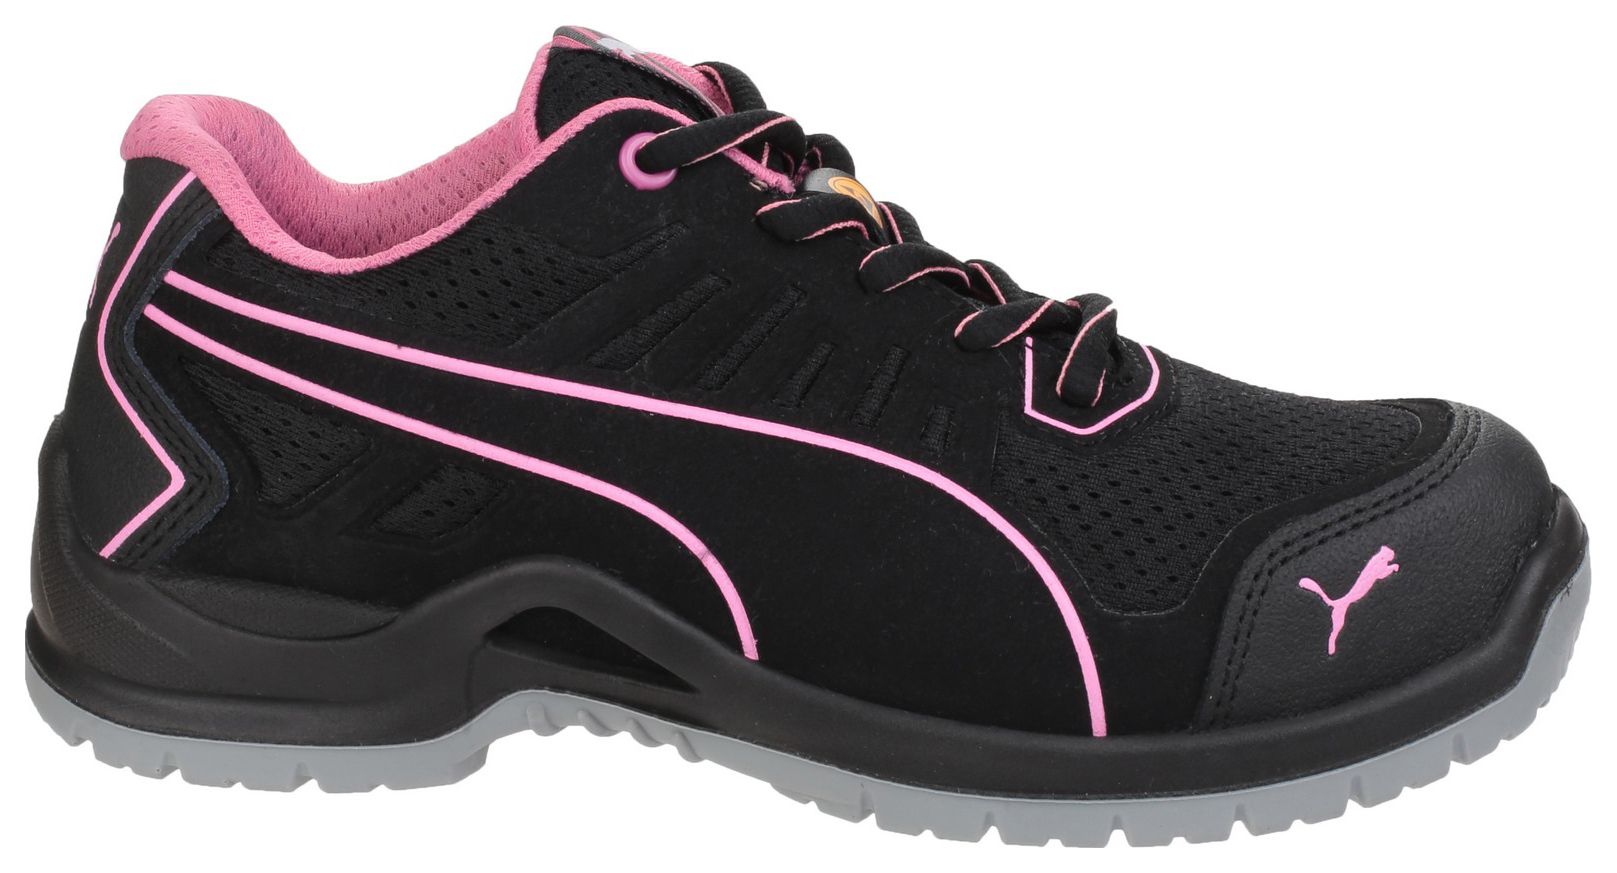 Image of Puma Fuse Technic 644110 Womens Safety Trainers Black - Size 37